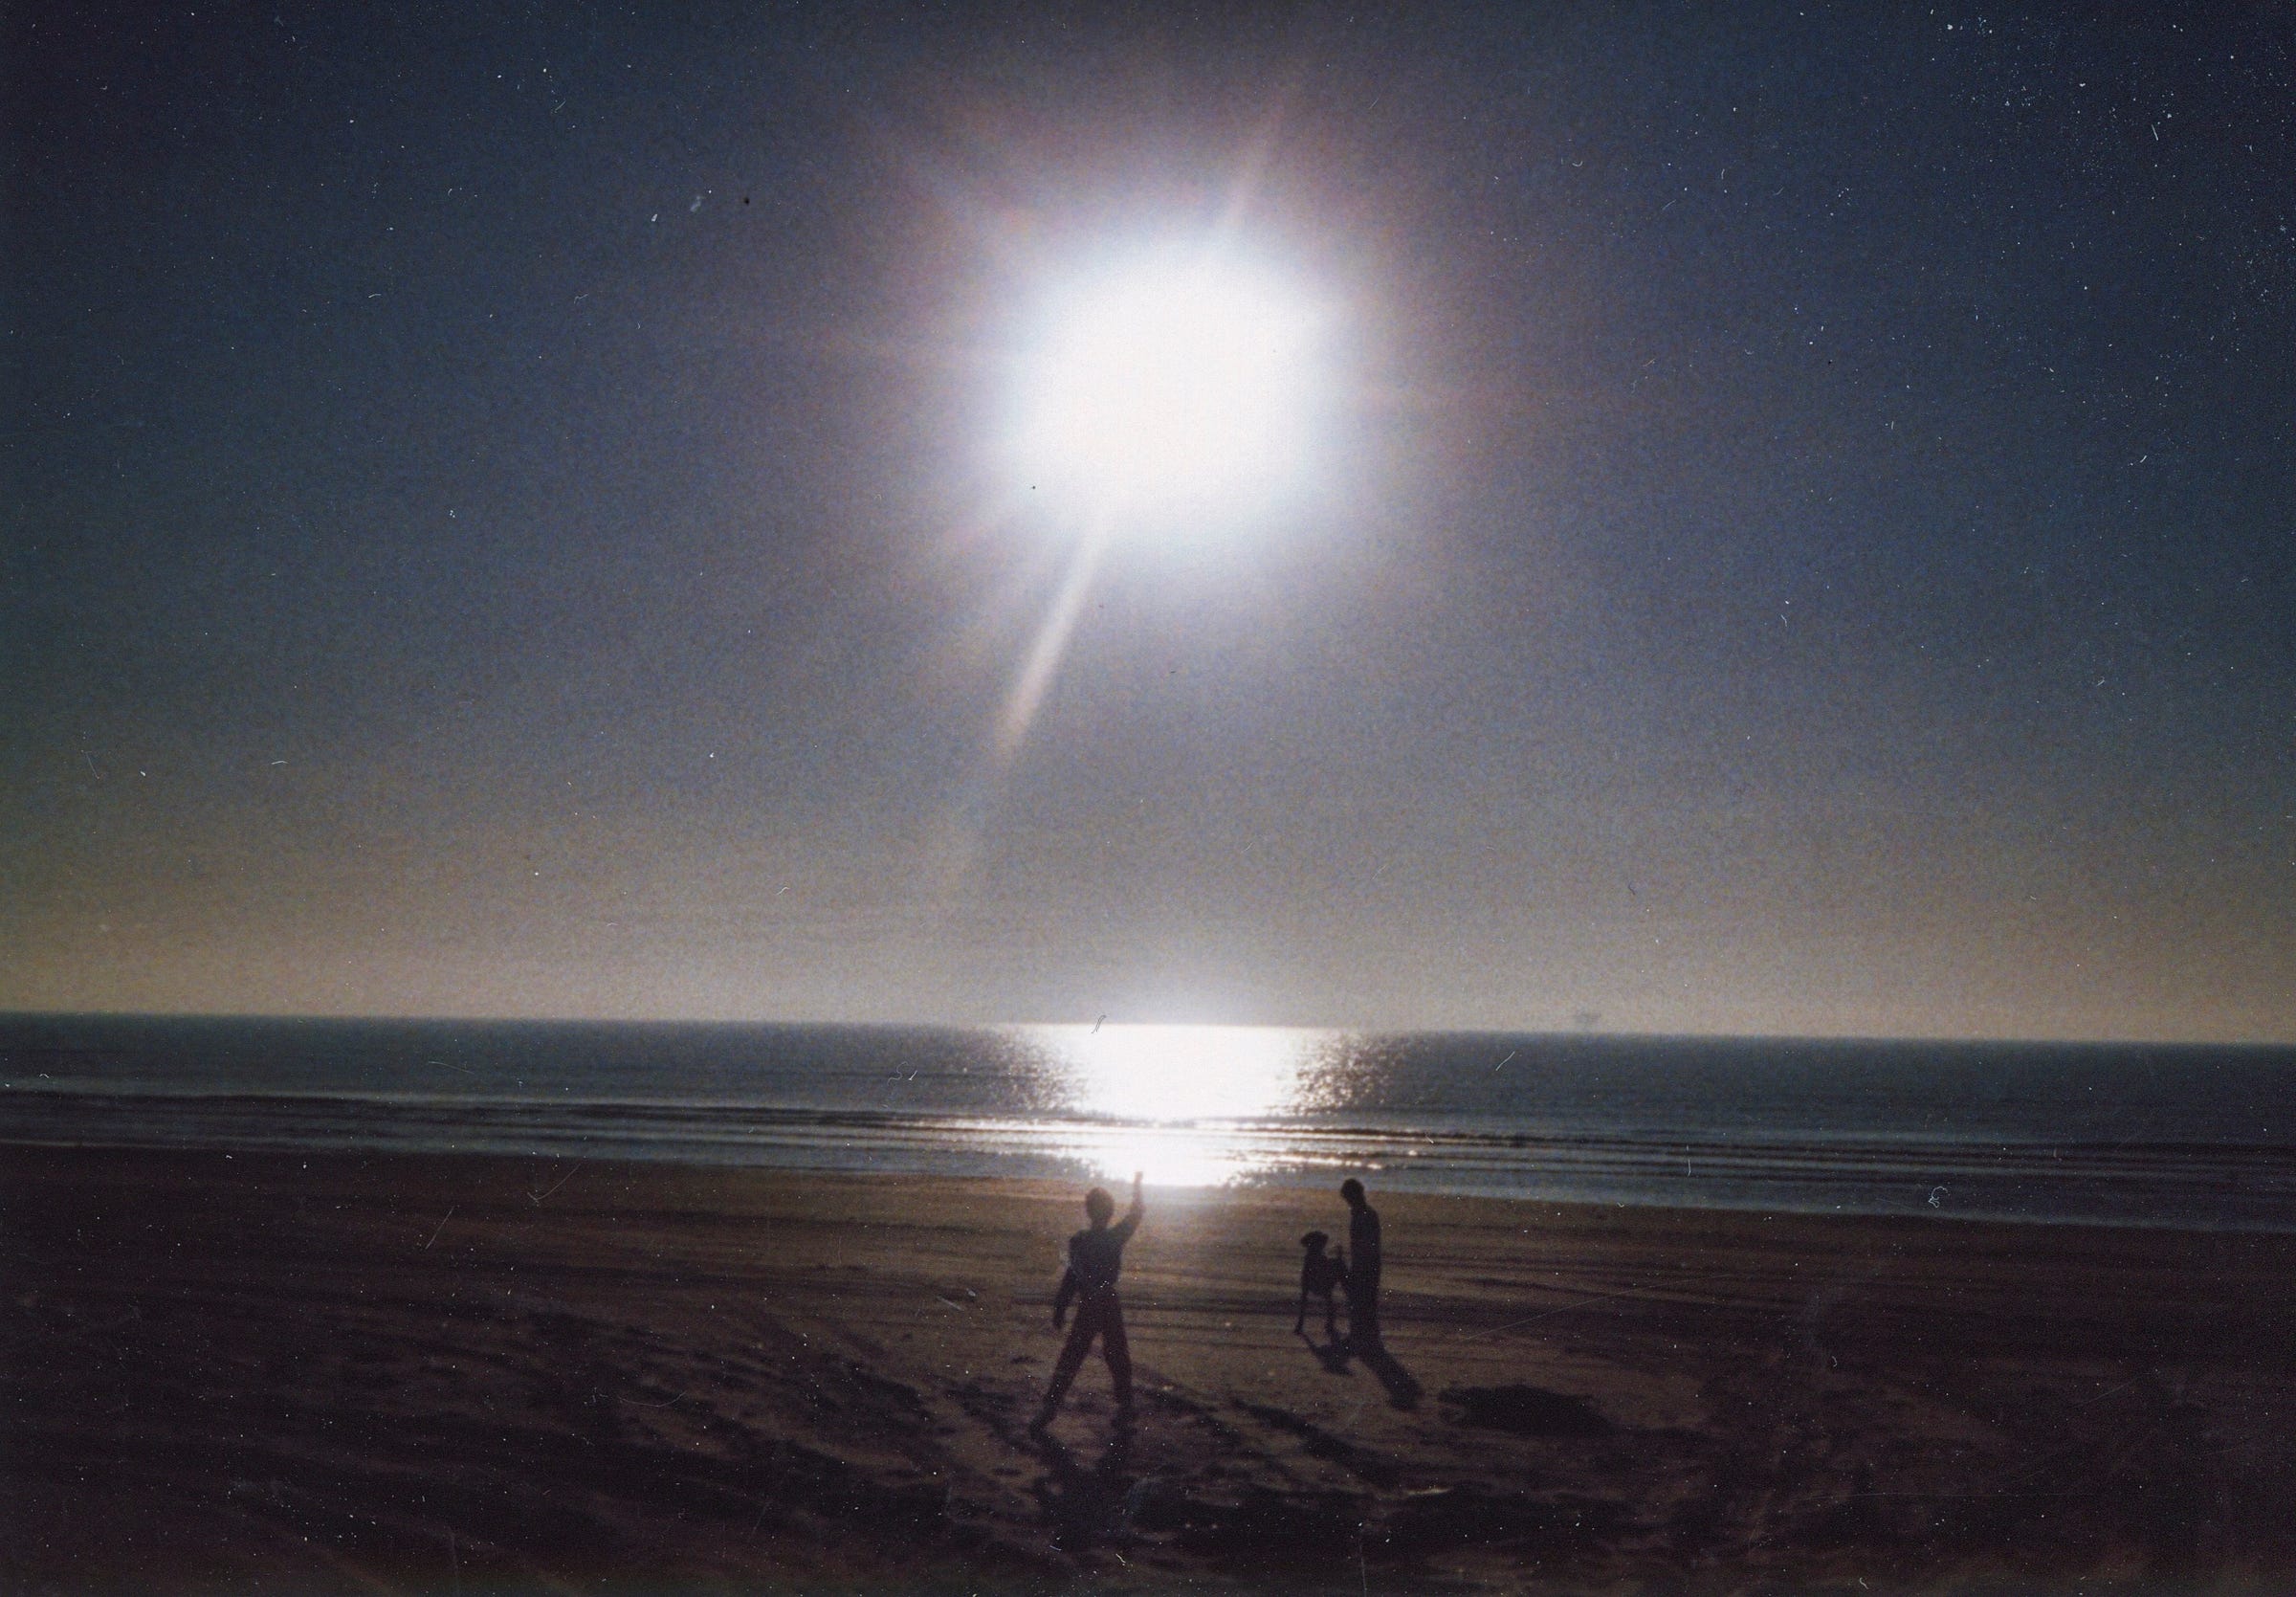 The setting sun creates a white glow over the beach reflecting on the water; the shadows of two people and a dog are backlight by the sun as they play on the shore